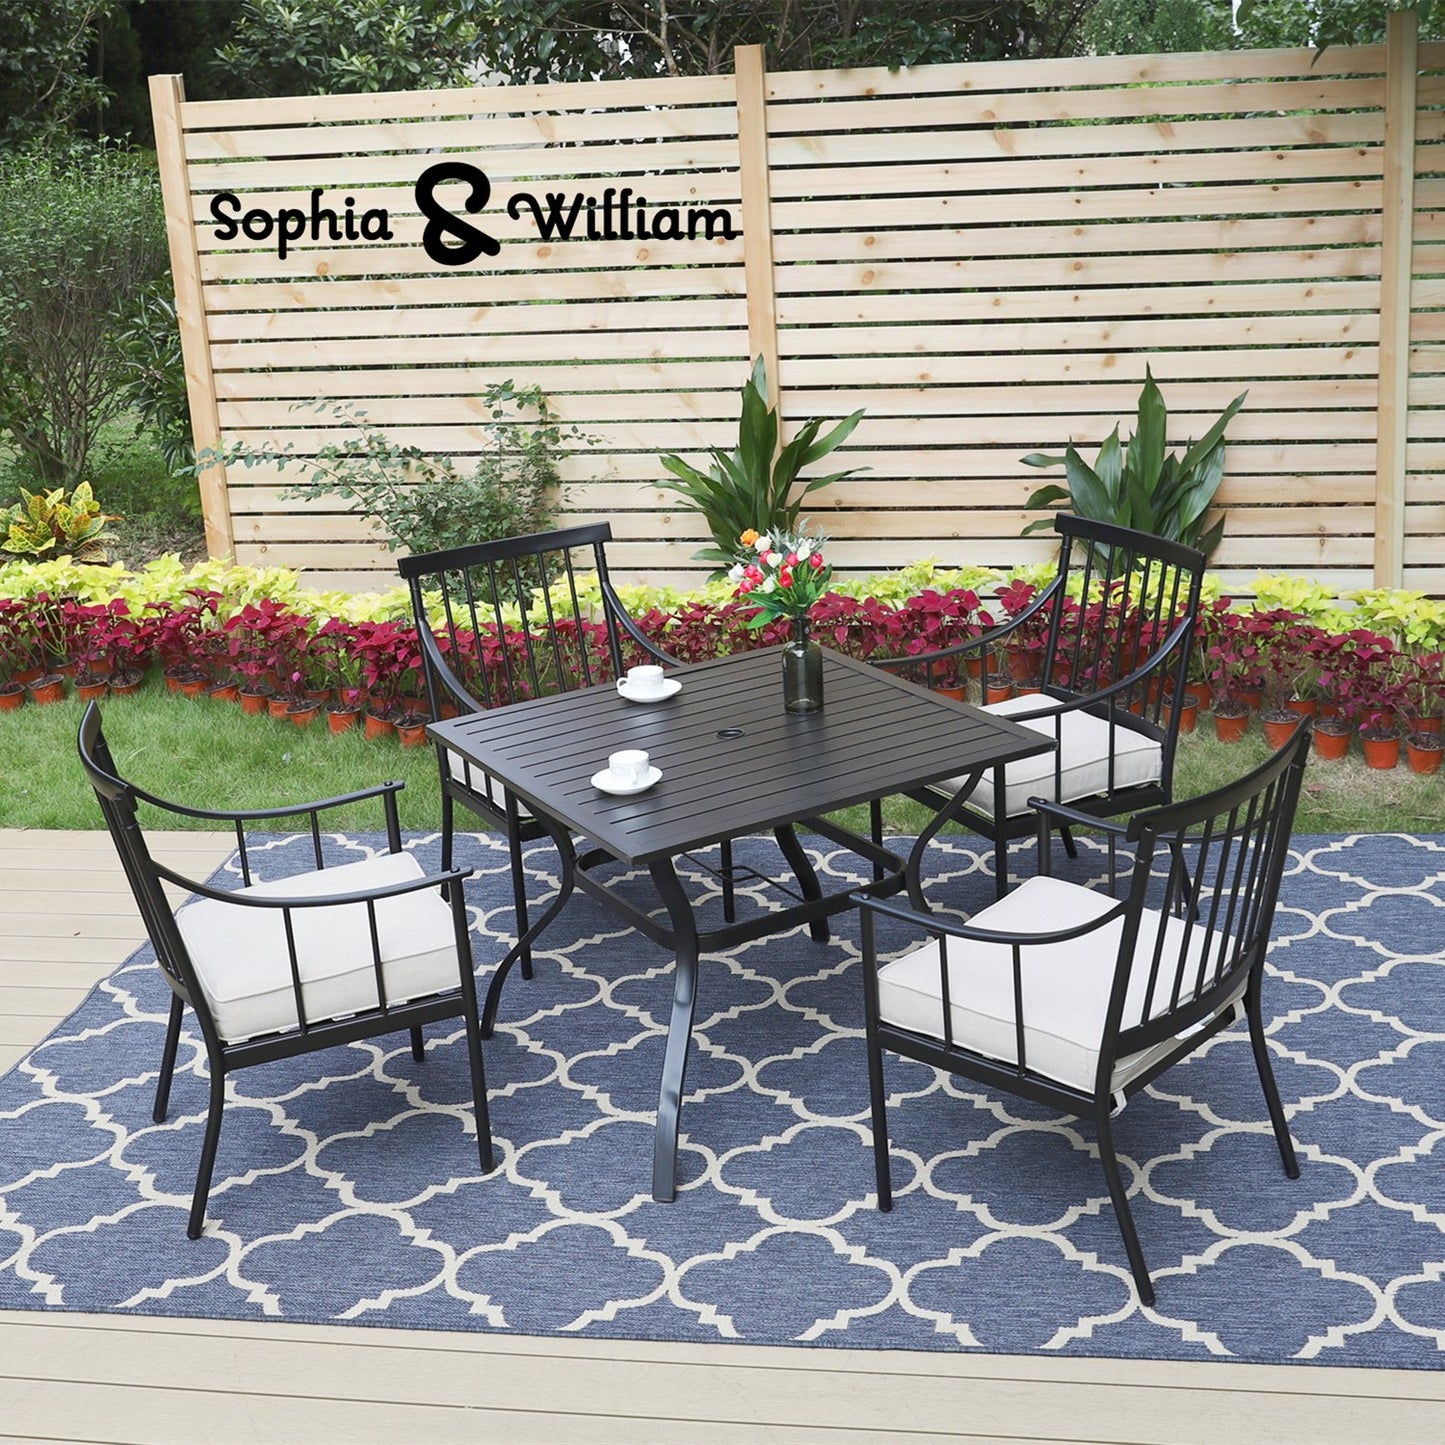 Sophia&William 5-Piece Outdoor Patio Dining Set Metal Padded Chairs and Table Set